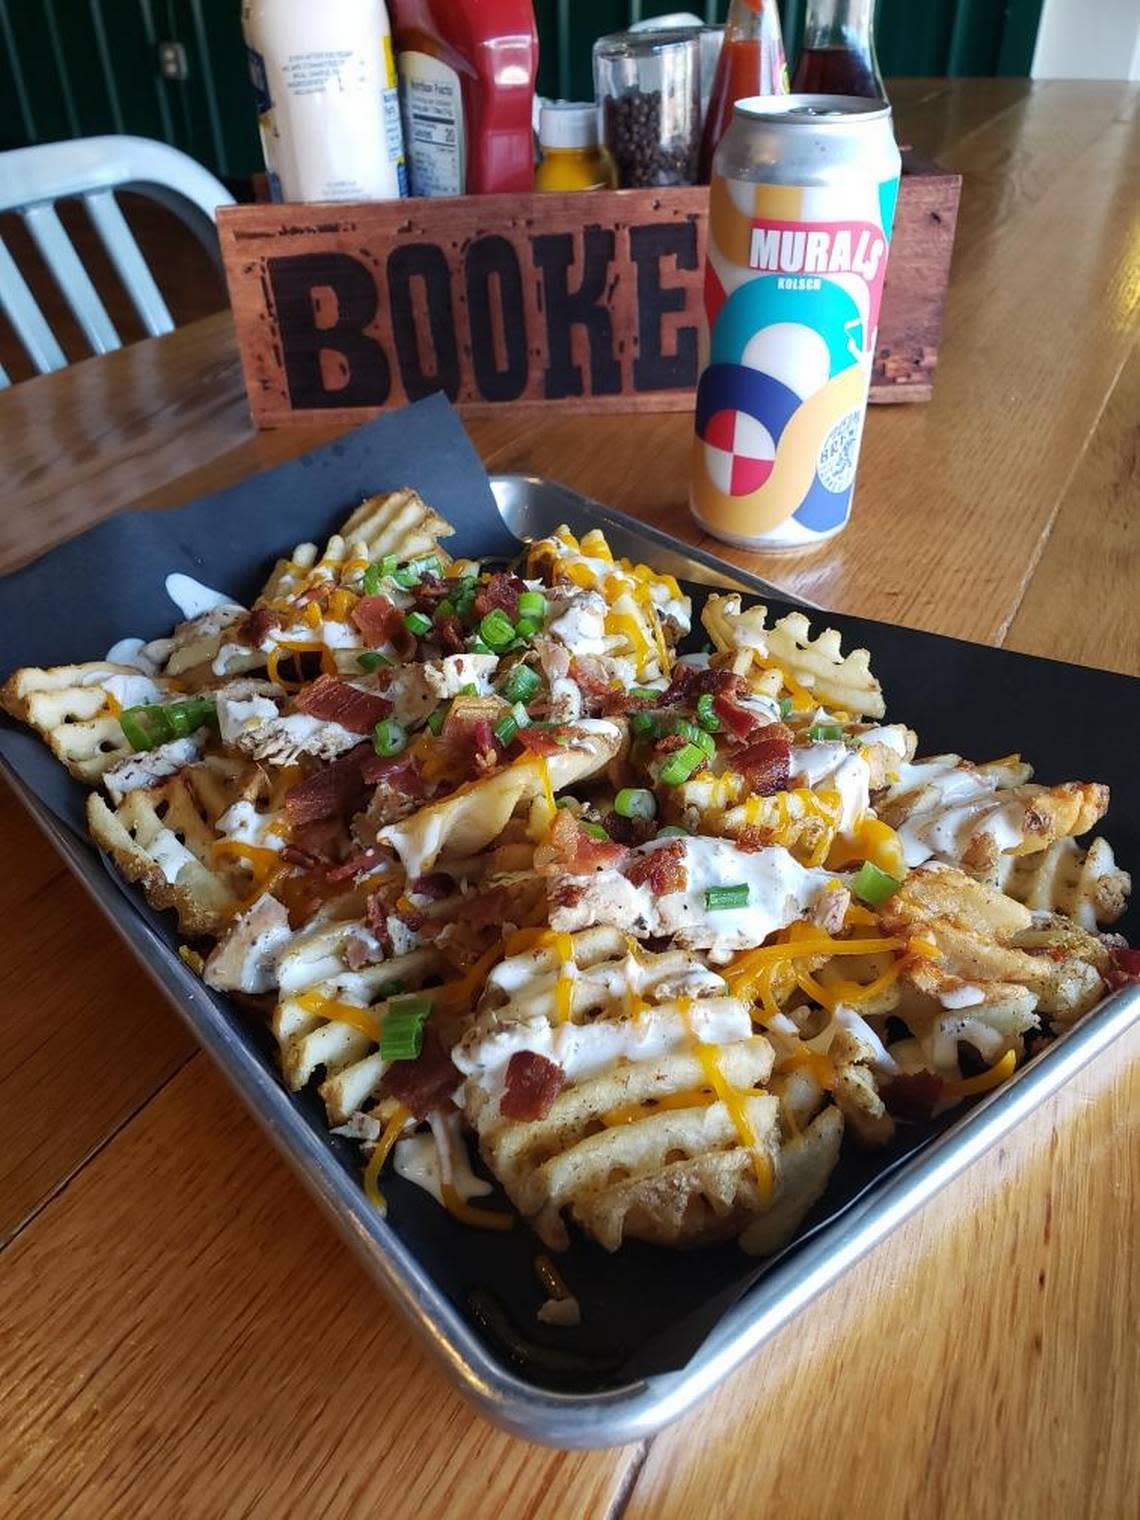 Here’s the entry from Piedmont Brewing & Kitchen for the Downtown Macon French Fry Fight on Wednesday: Chicken bacon ranch fries, waffle fries topped with shredded cheddar, smoked chicken, bacon, ranch dressing and garnished with green onions.